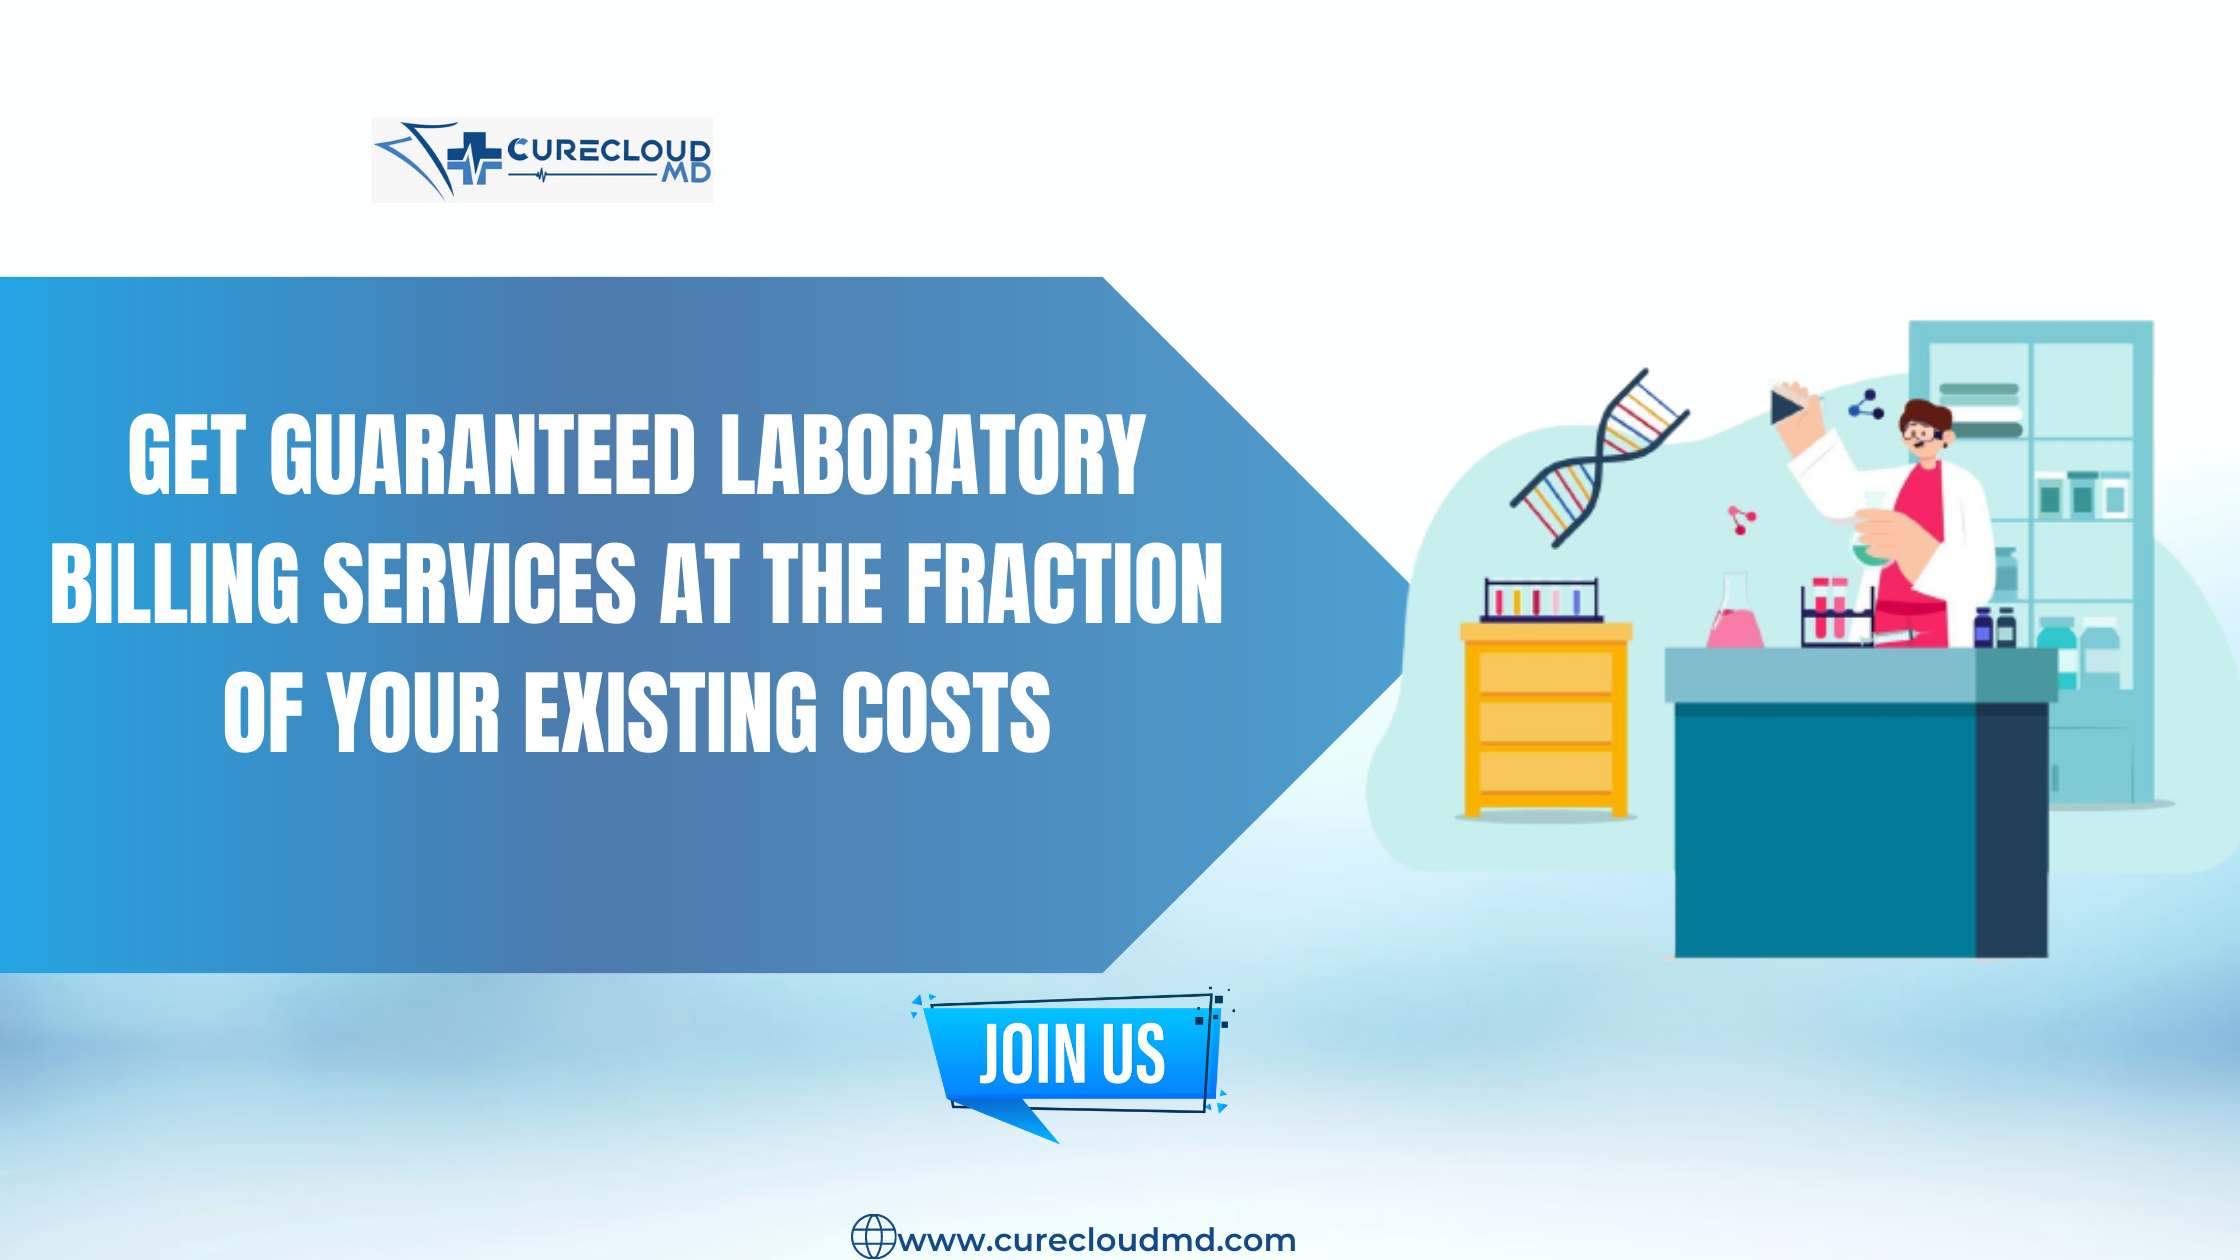 Get Guaranteed Laboratory Billing Services At The Fraction Of Your Existing Costs